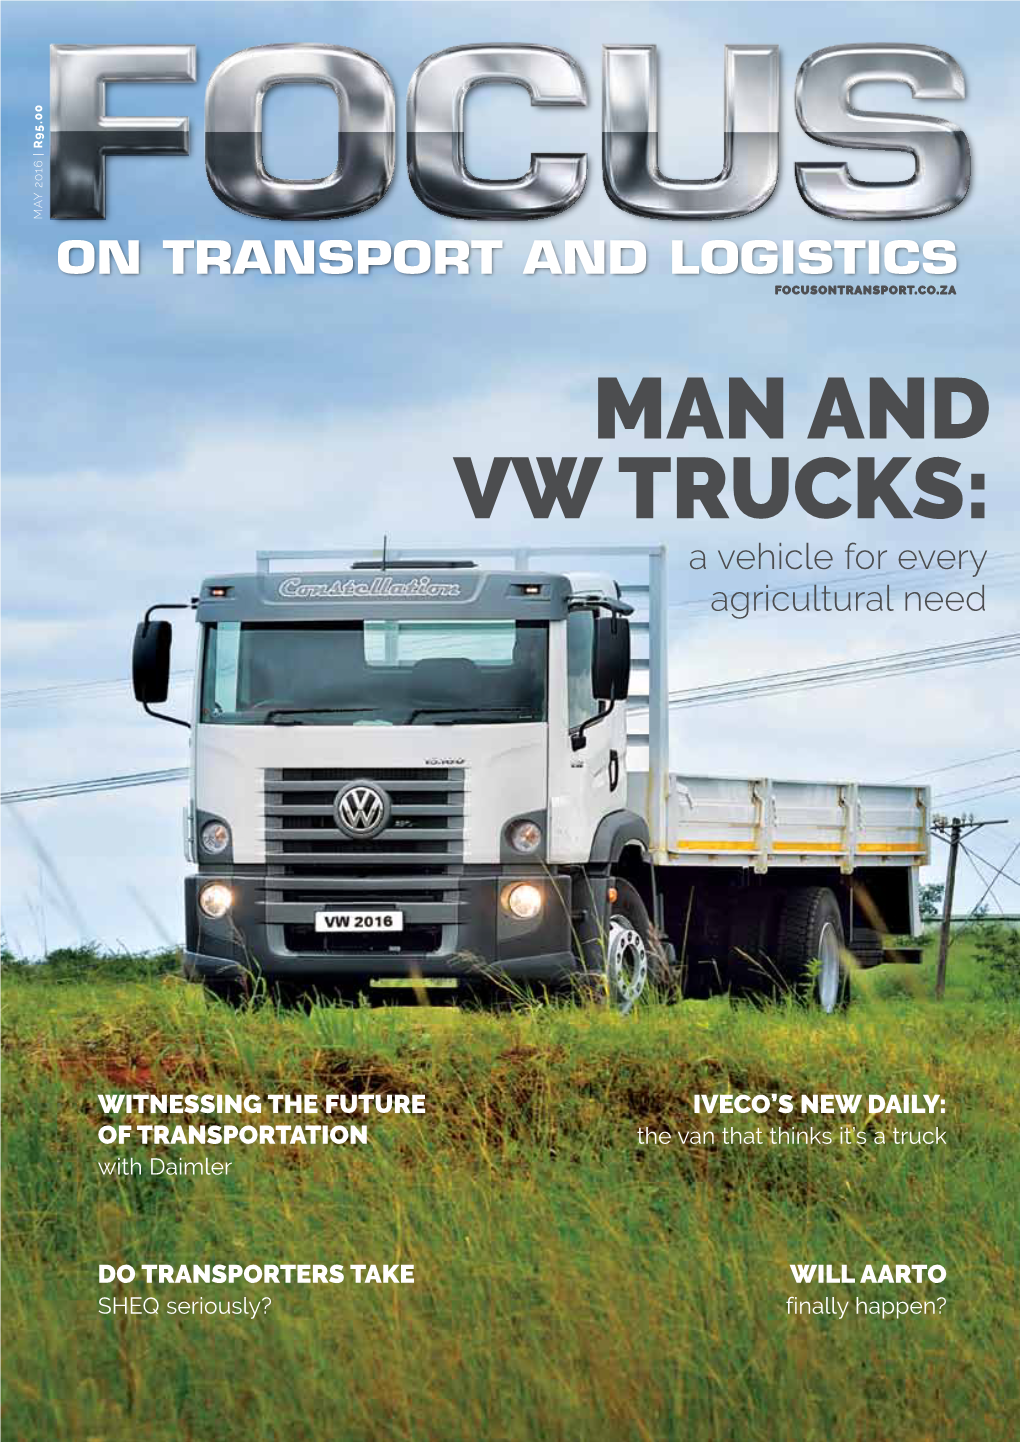 MAN and VW Trucks: a Vehicle for Every Agricultural Need